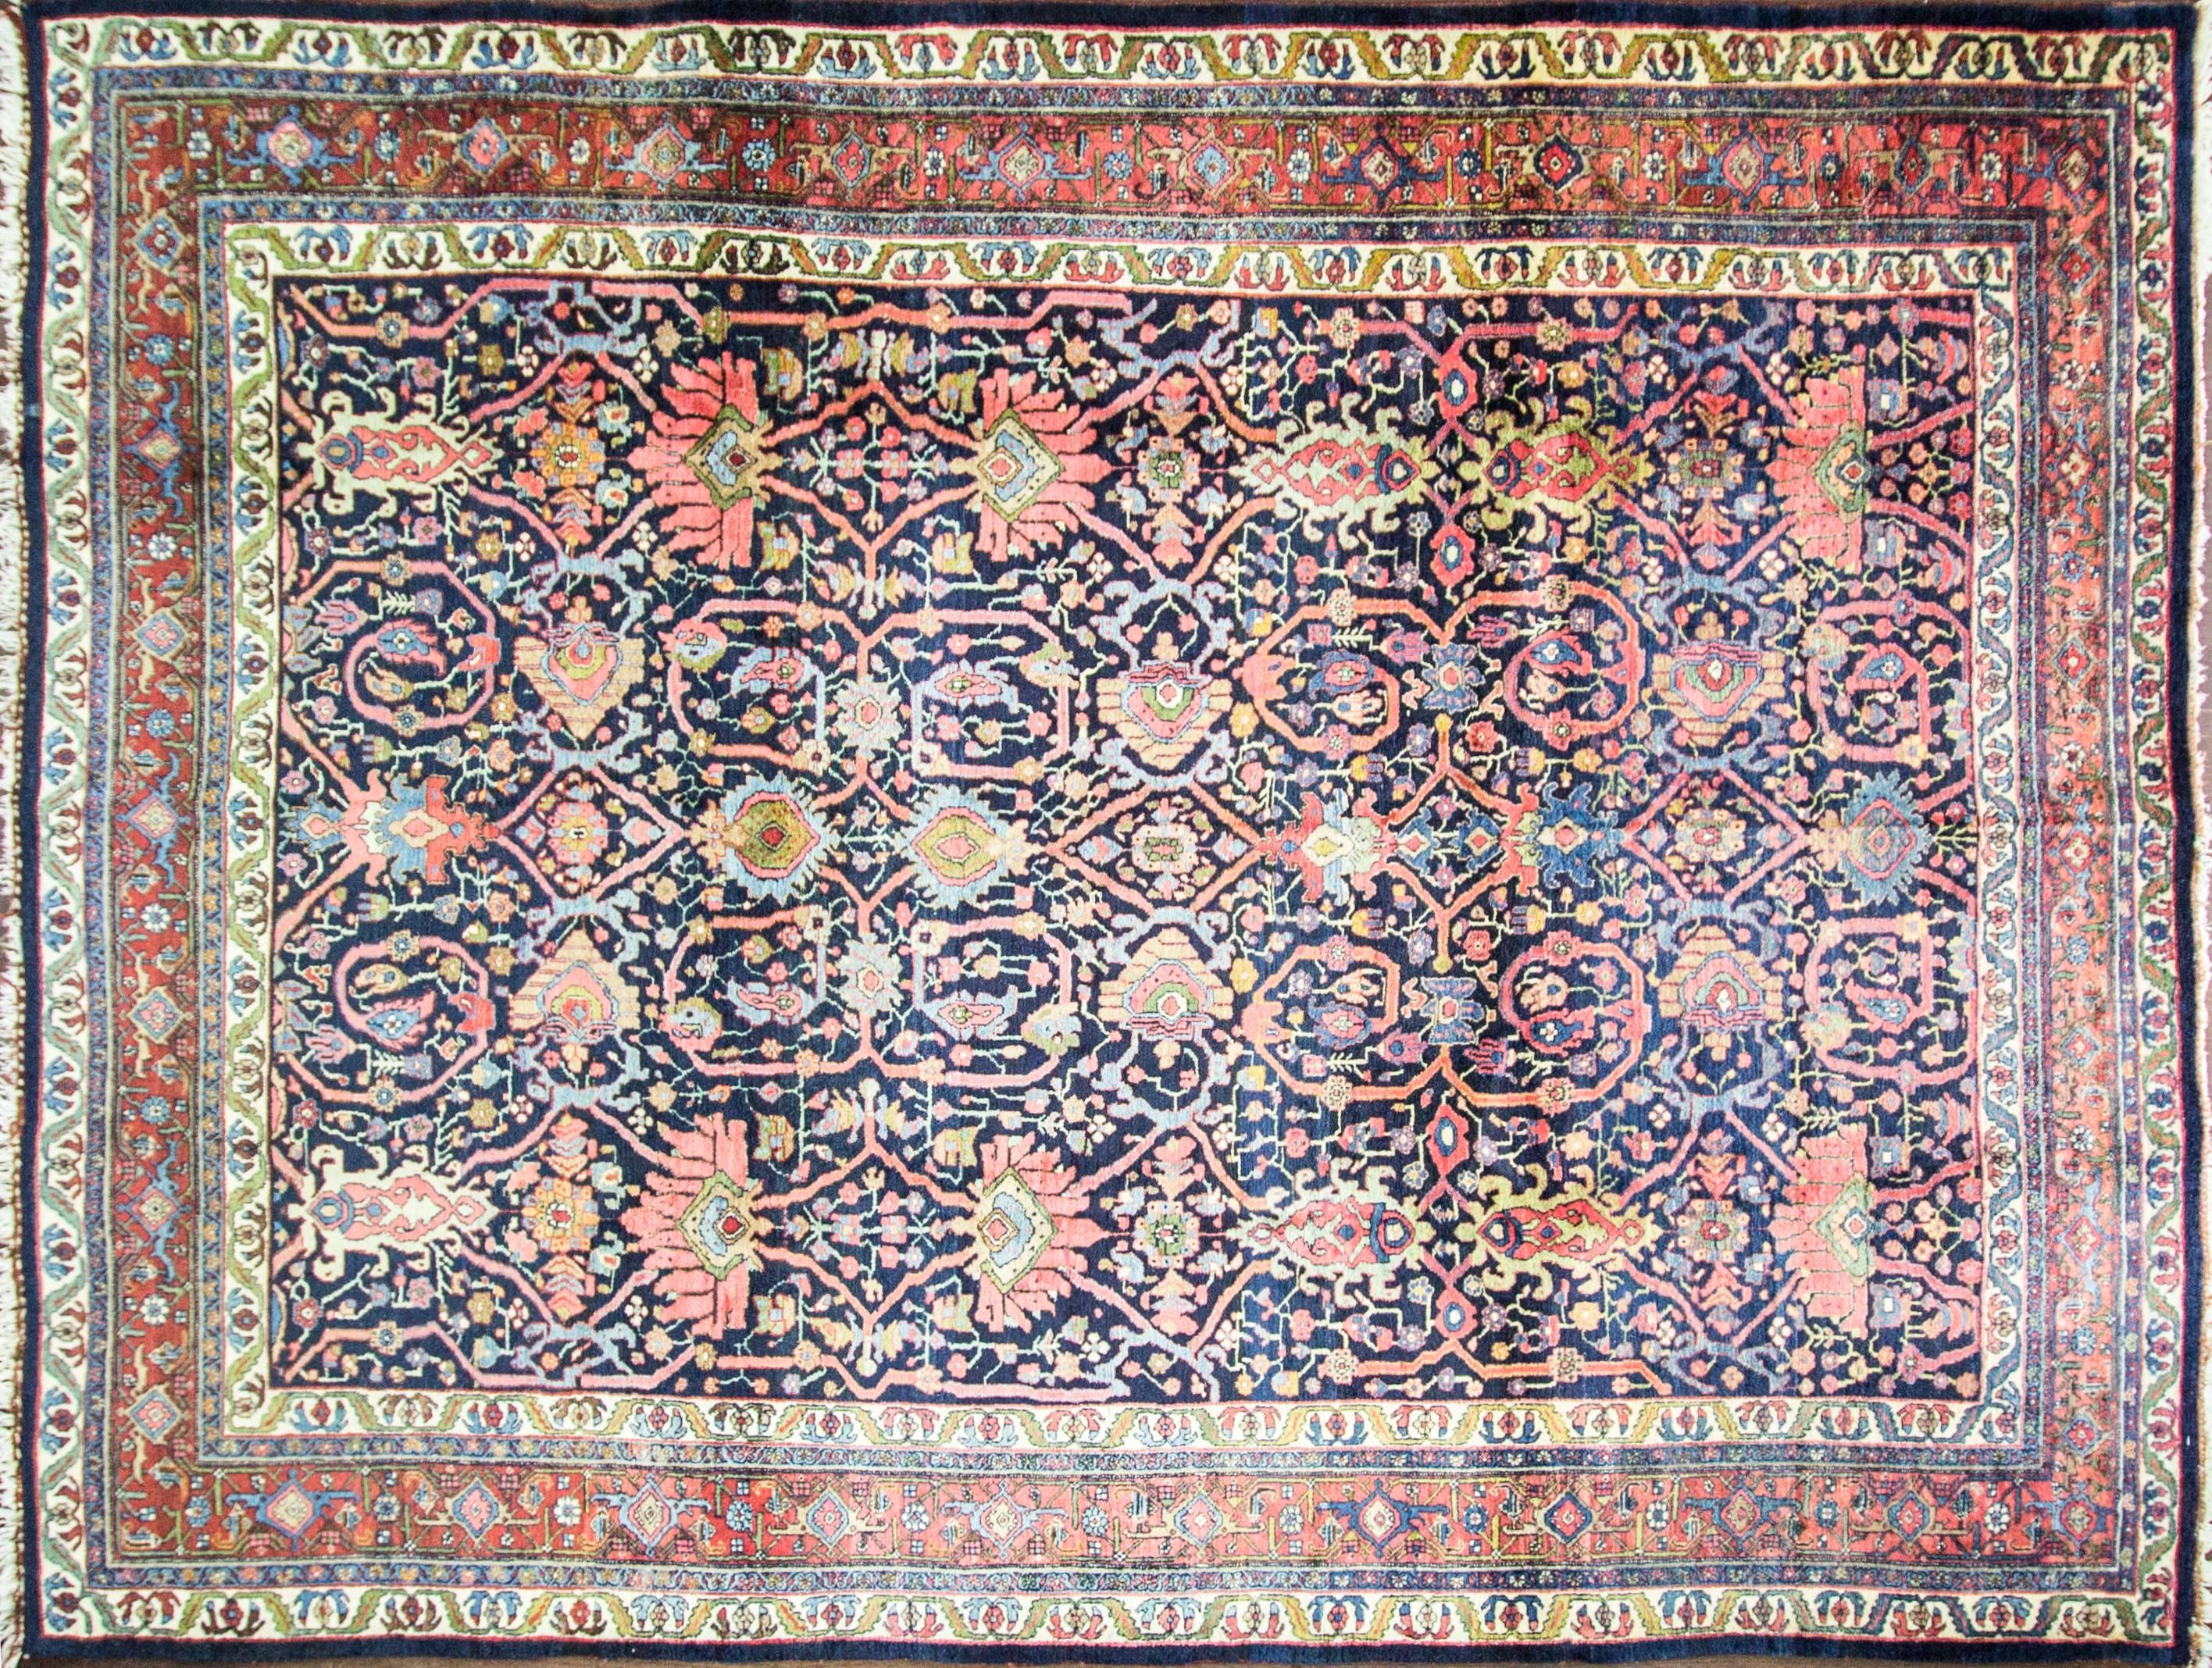 Bidjar is a town in Persian Kurdistan located in north-west Persia. The Bidjar is noted as being the stiffest carpet made, they are very heavy in relation to their size, and very thick and durable. All of the knots are symmetrical and the rows are